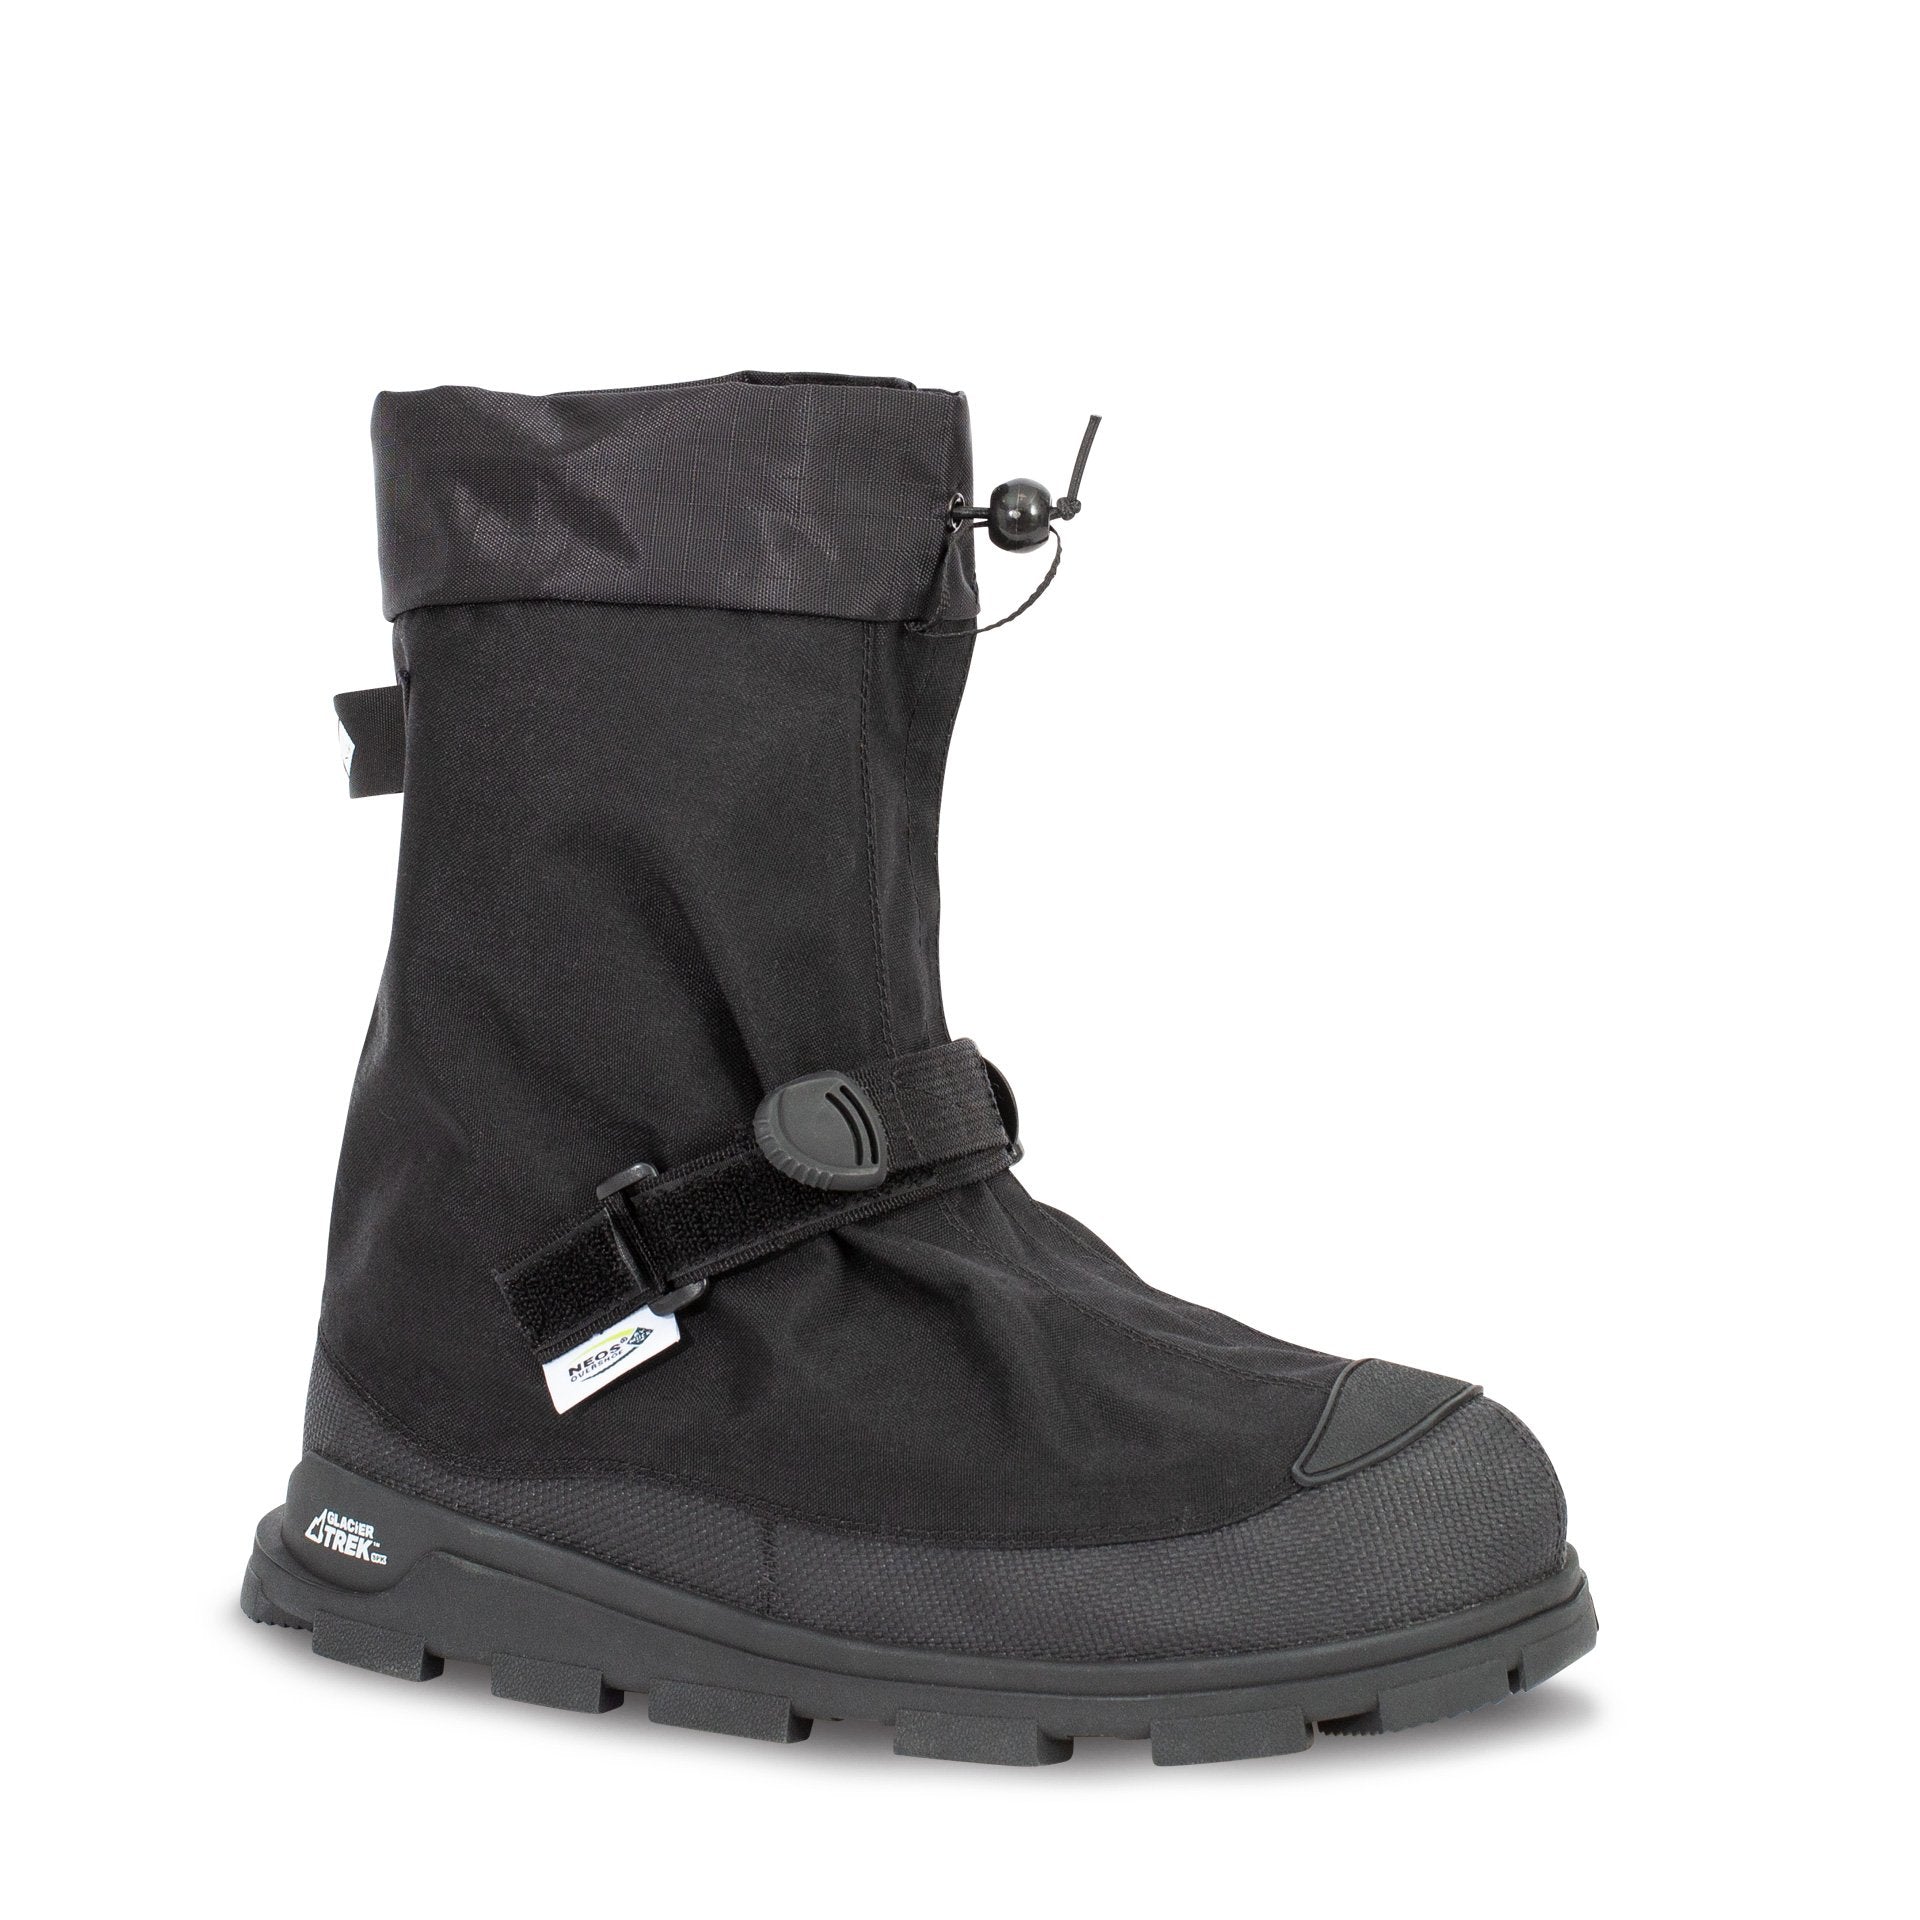 neos voyager overshoe